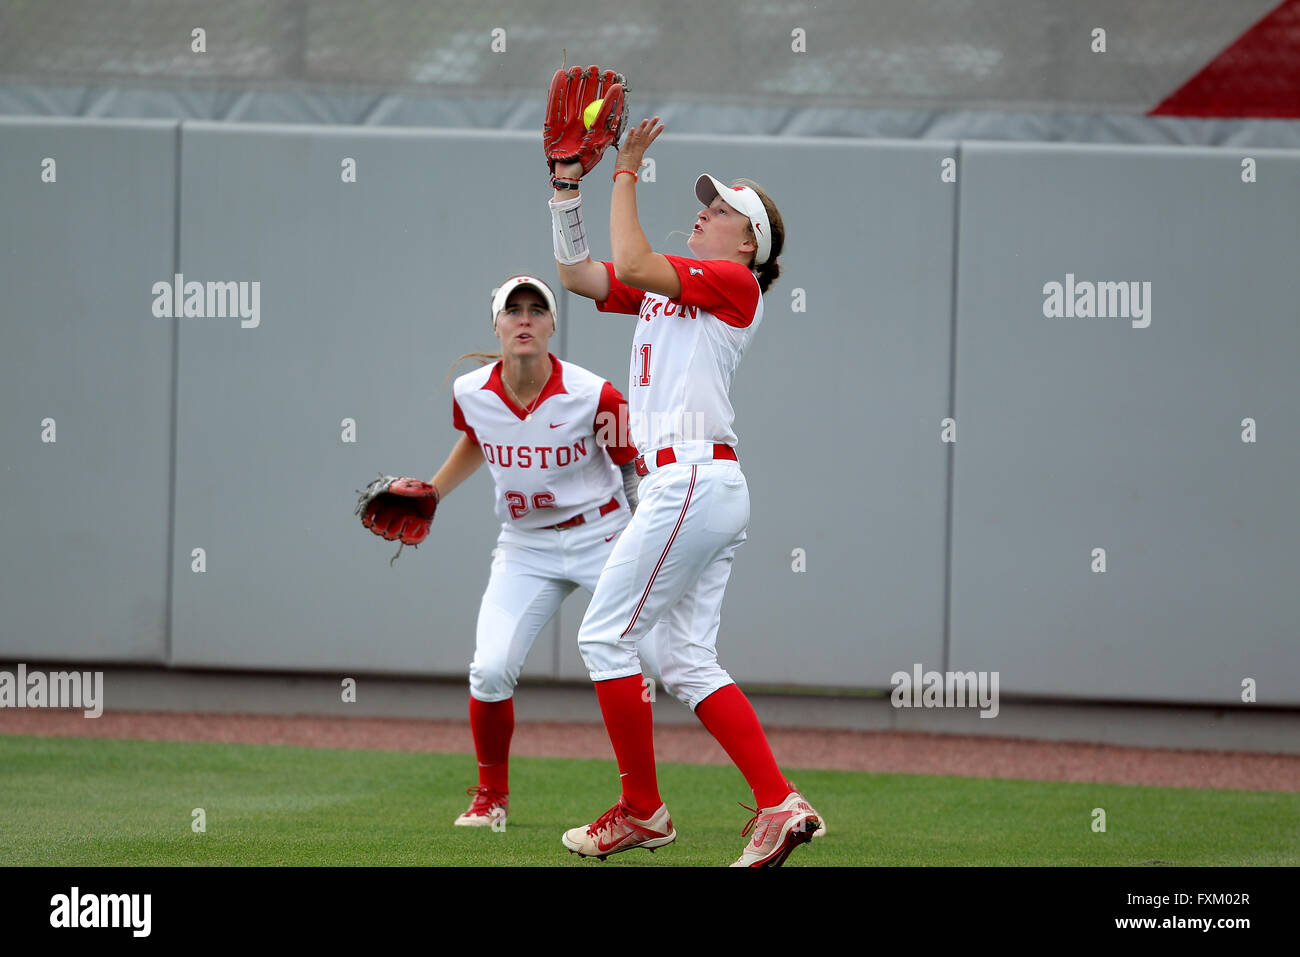 Houston, TX, USA. 16th Apr, 2016. Houston right fielder Elise LeBeouf #21 catches a fly ball for an out during the NCAA softball game between Houston and Central Florida from Cougar Softball Stadium in Houston, TX. UCF won, 8-3. Credit image: Erik Williams/Cal Sport Media/Alamy Live News Stock Photo